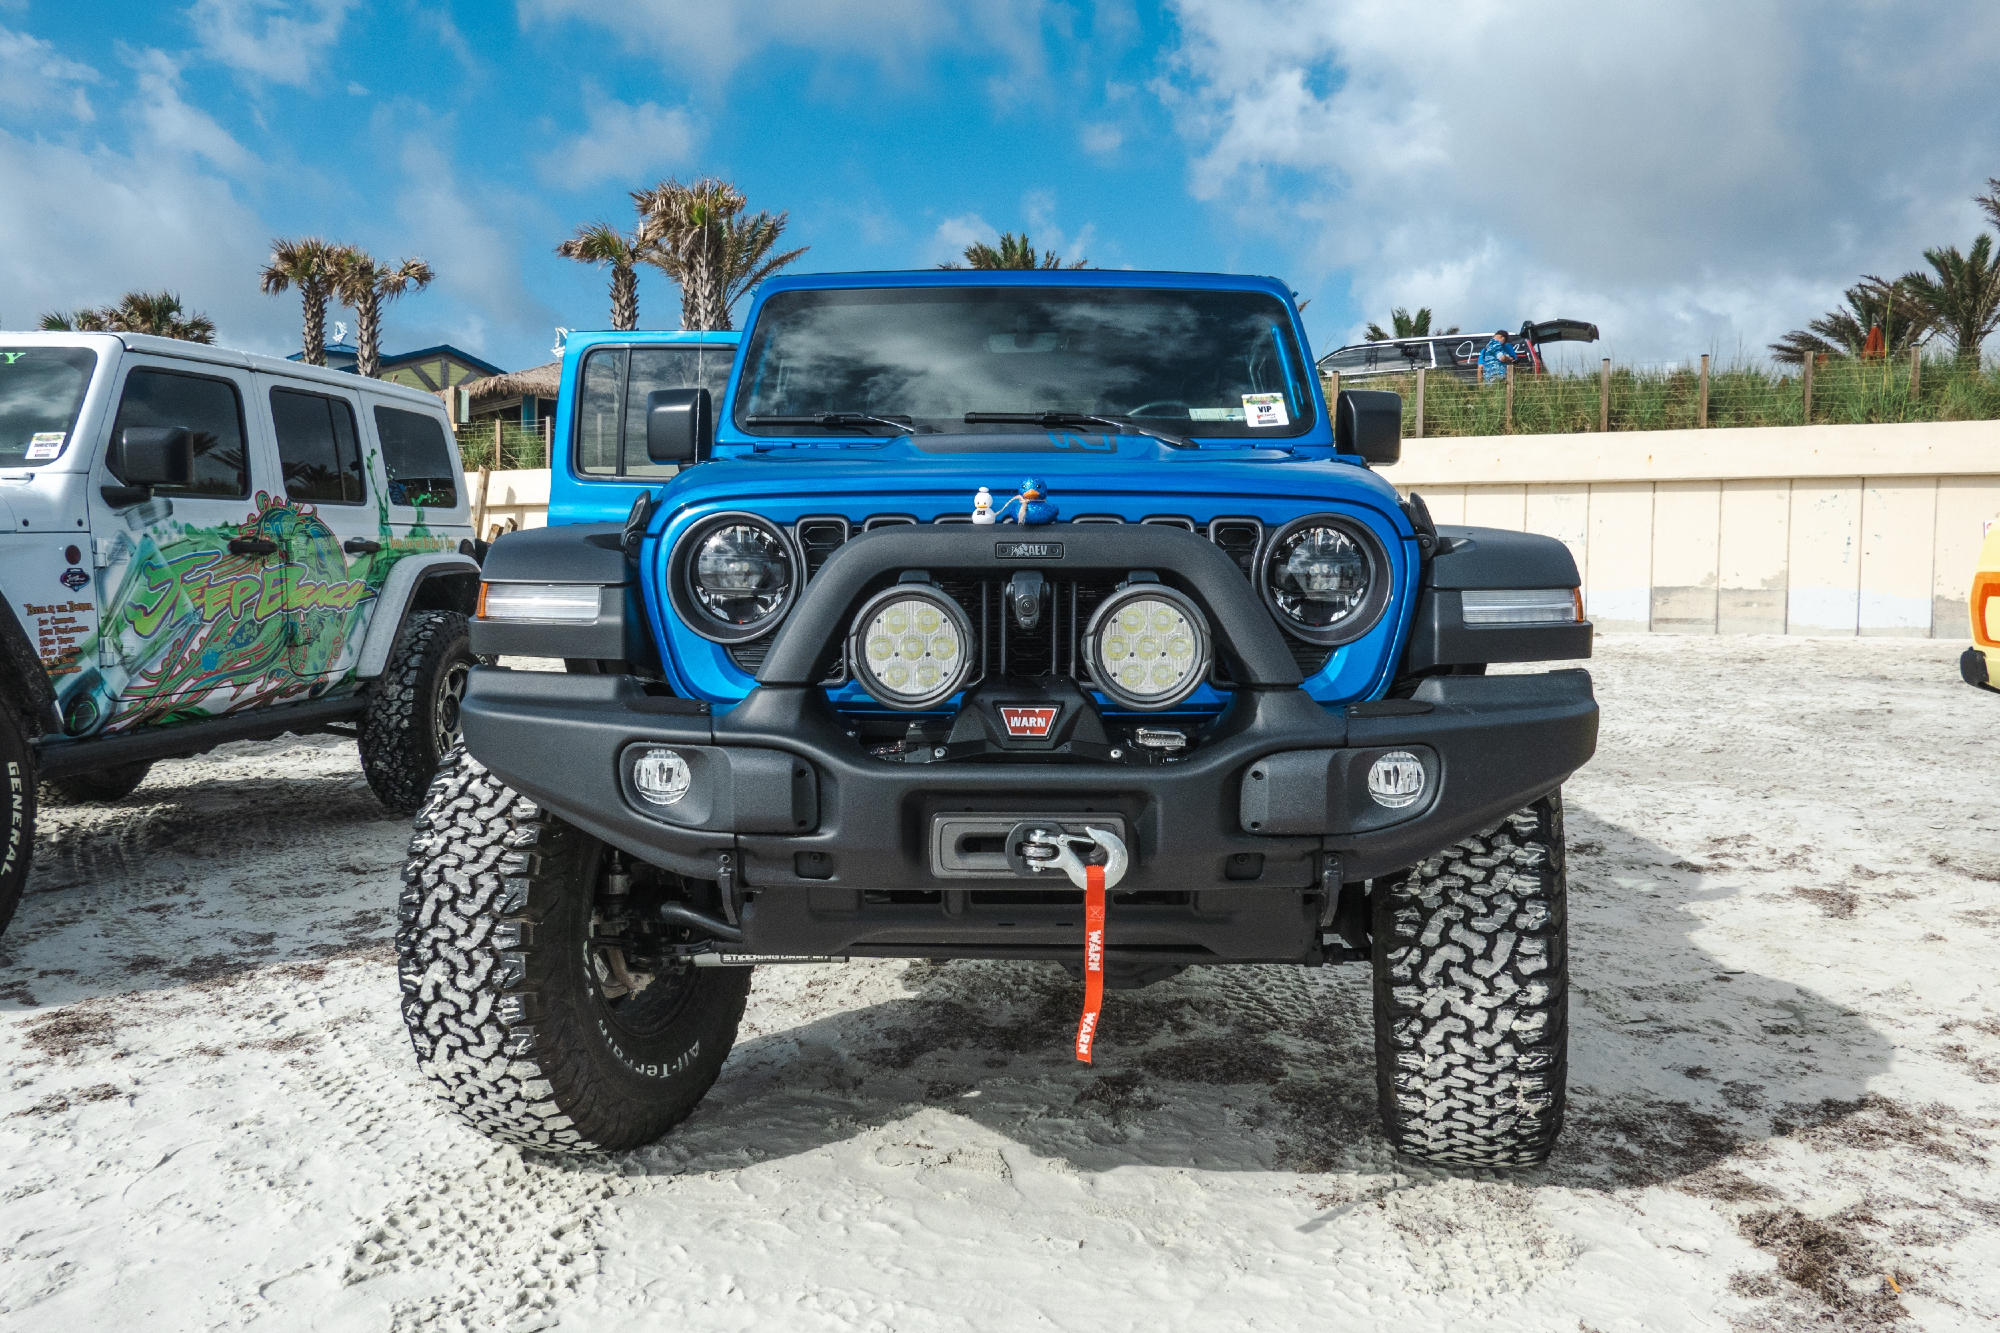 Photo from Jeep Beach Week 2023 featuring the front of a blue Wrangler set up with off-road bumper, winch, and other options.